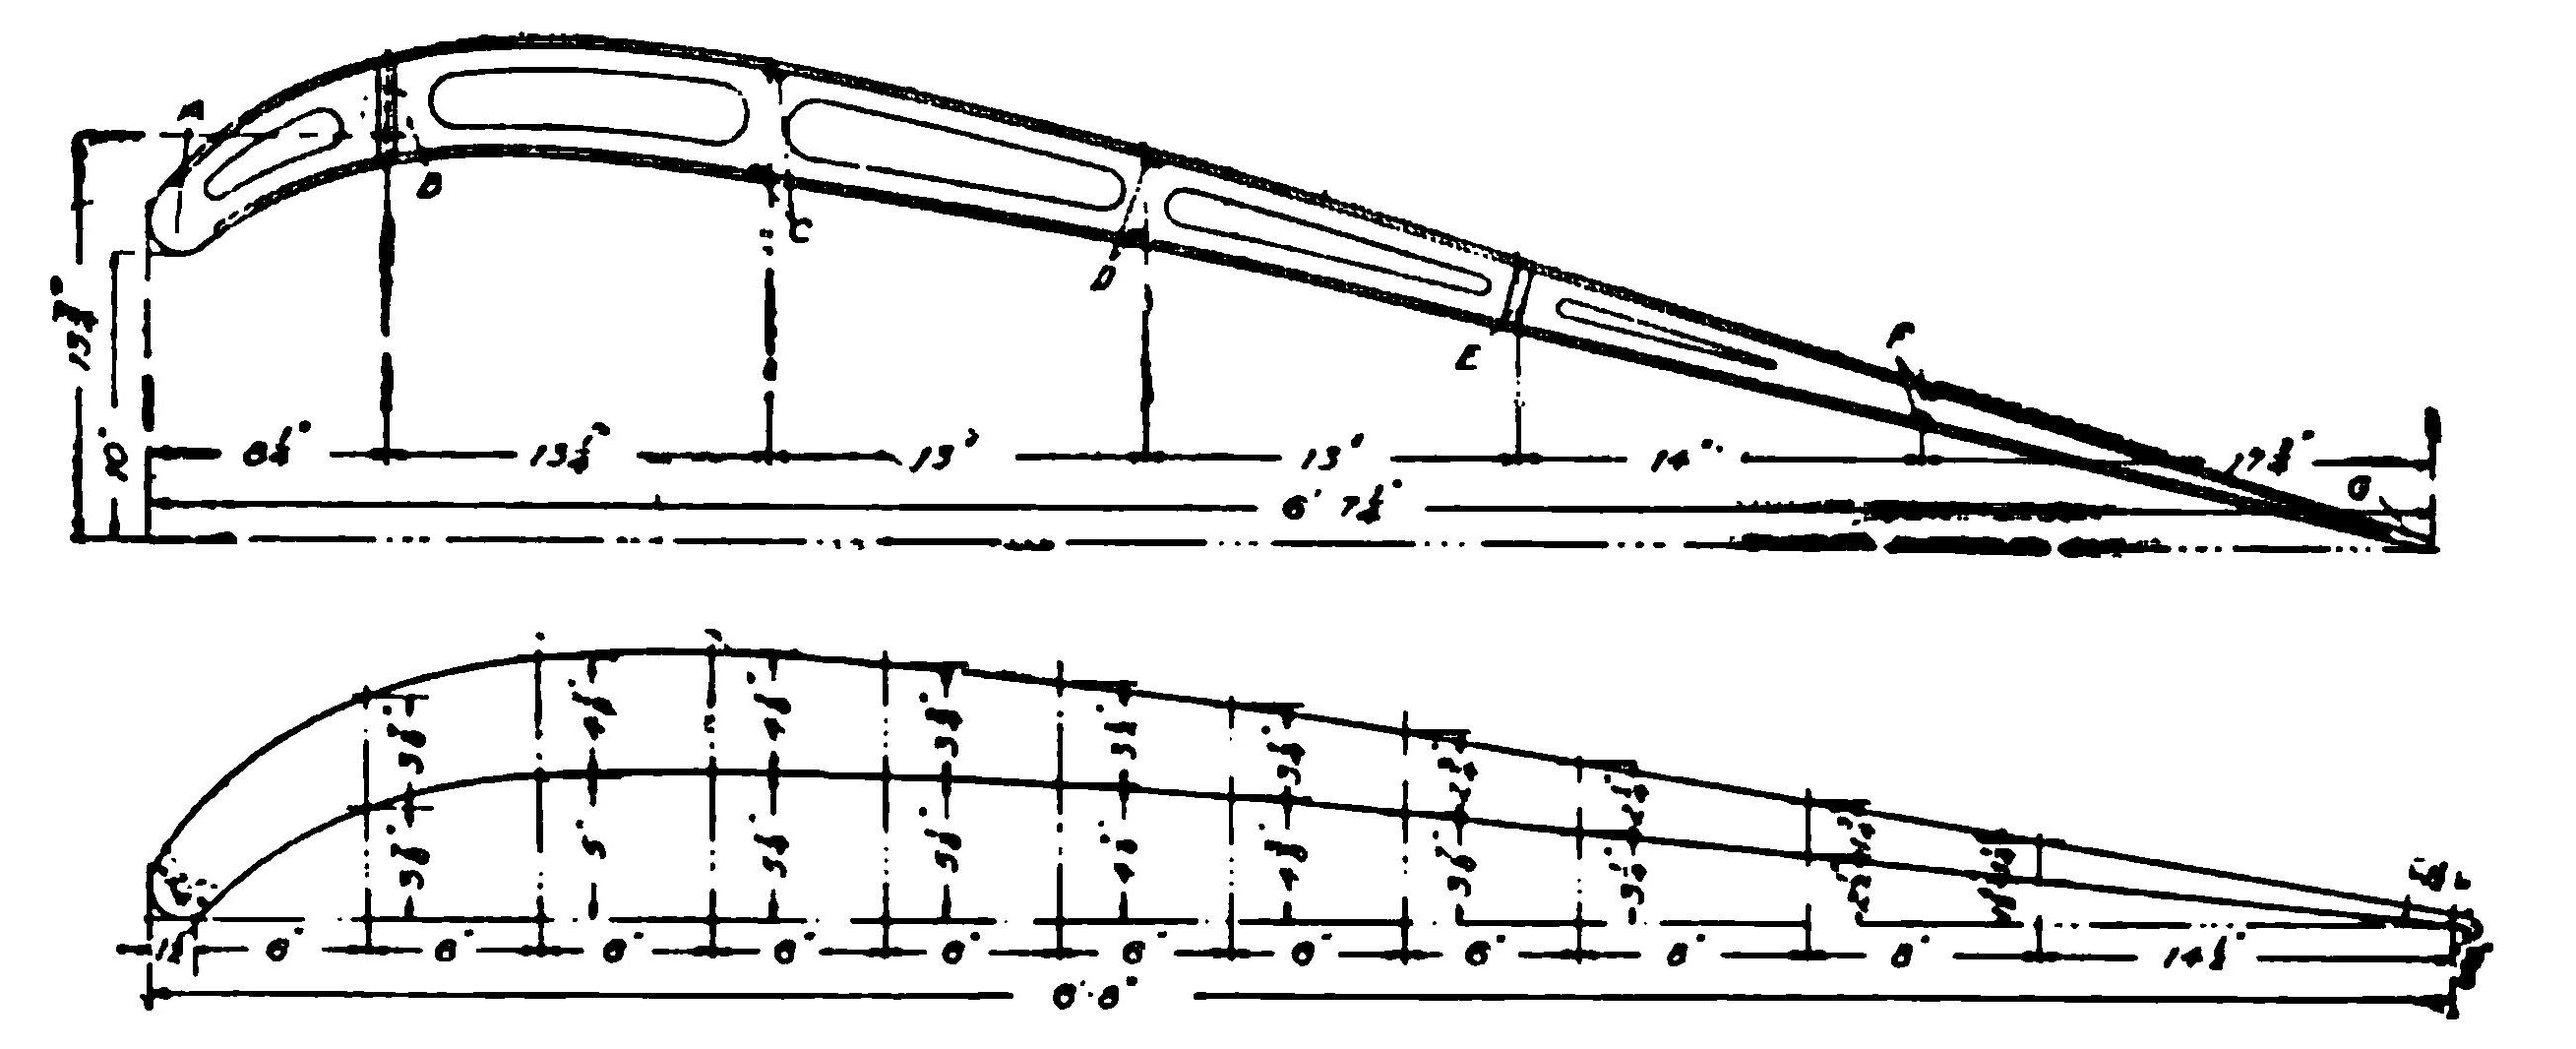 Fig. 30. Complete Rib of Bleriot Wing and Pattern from Which Web Is Cut